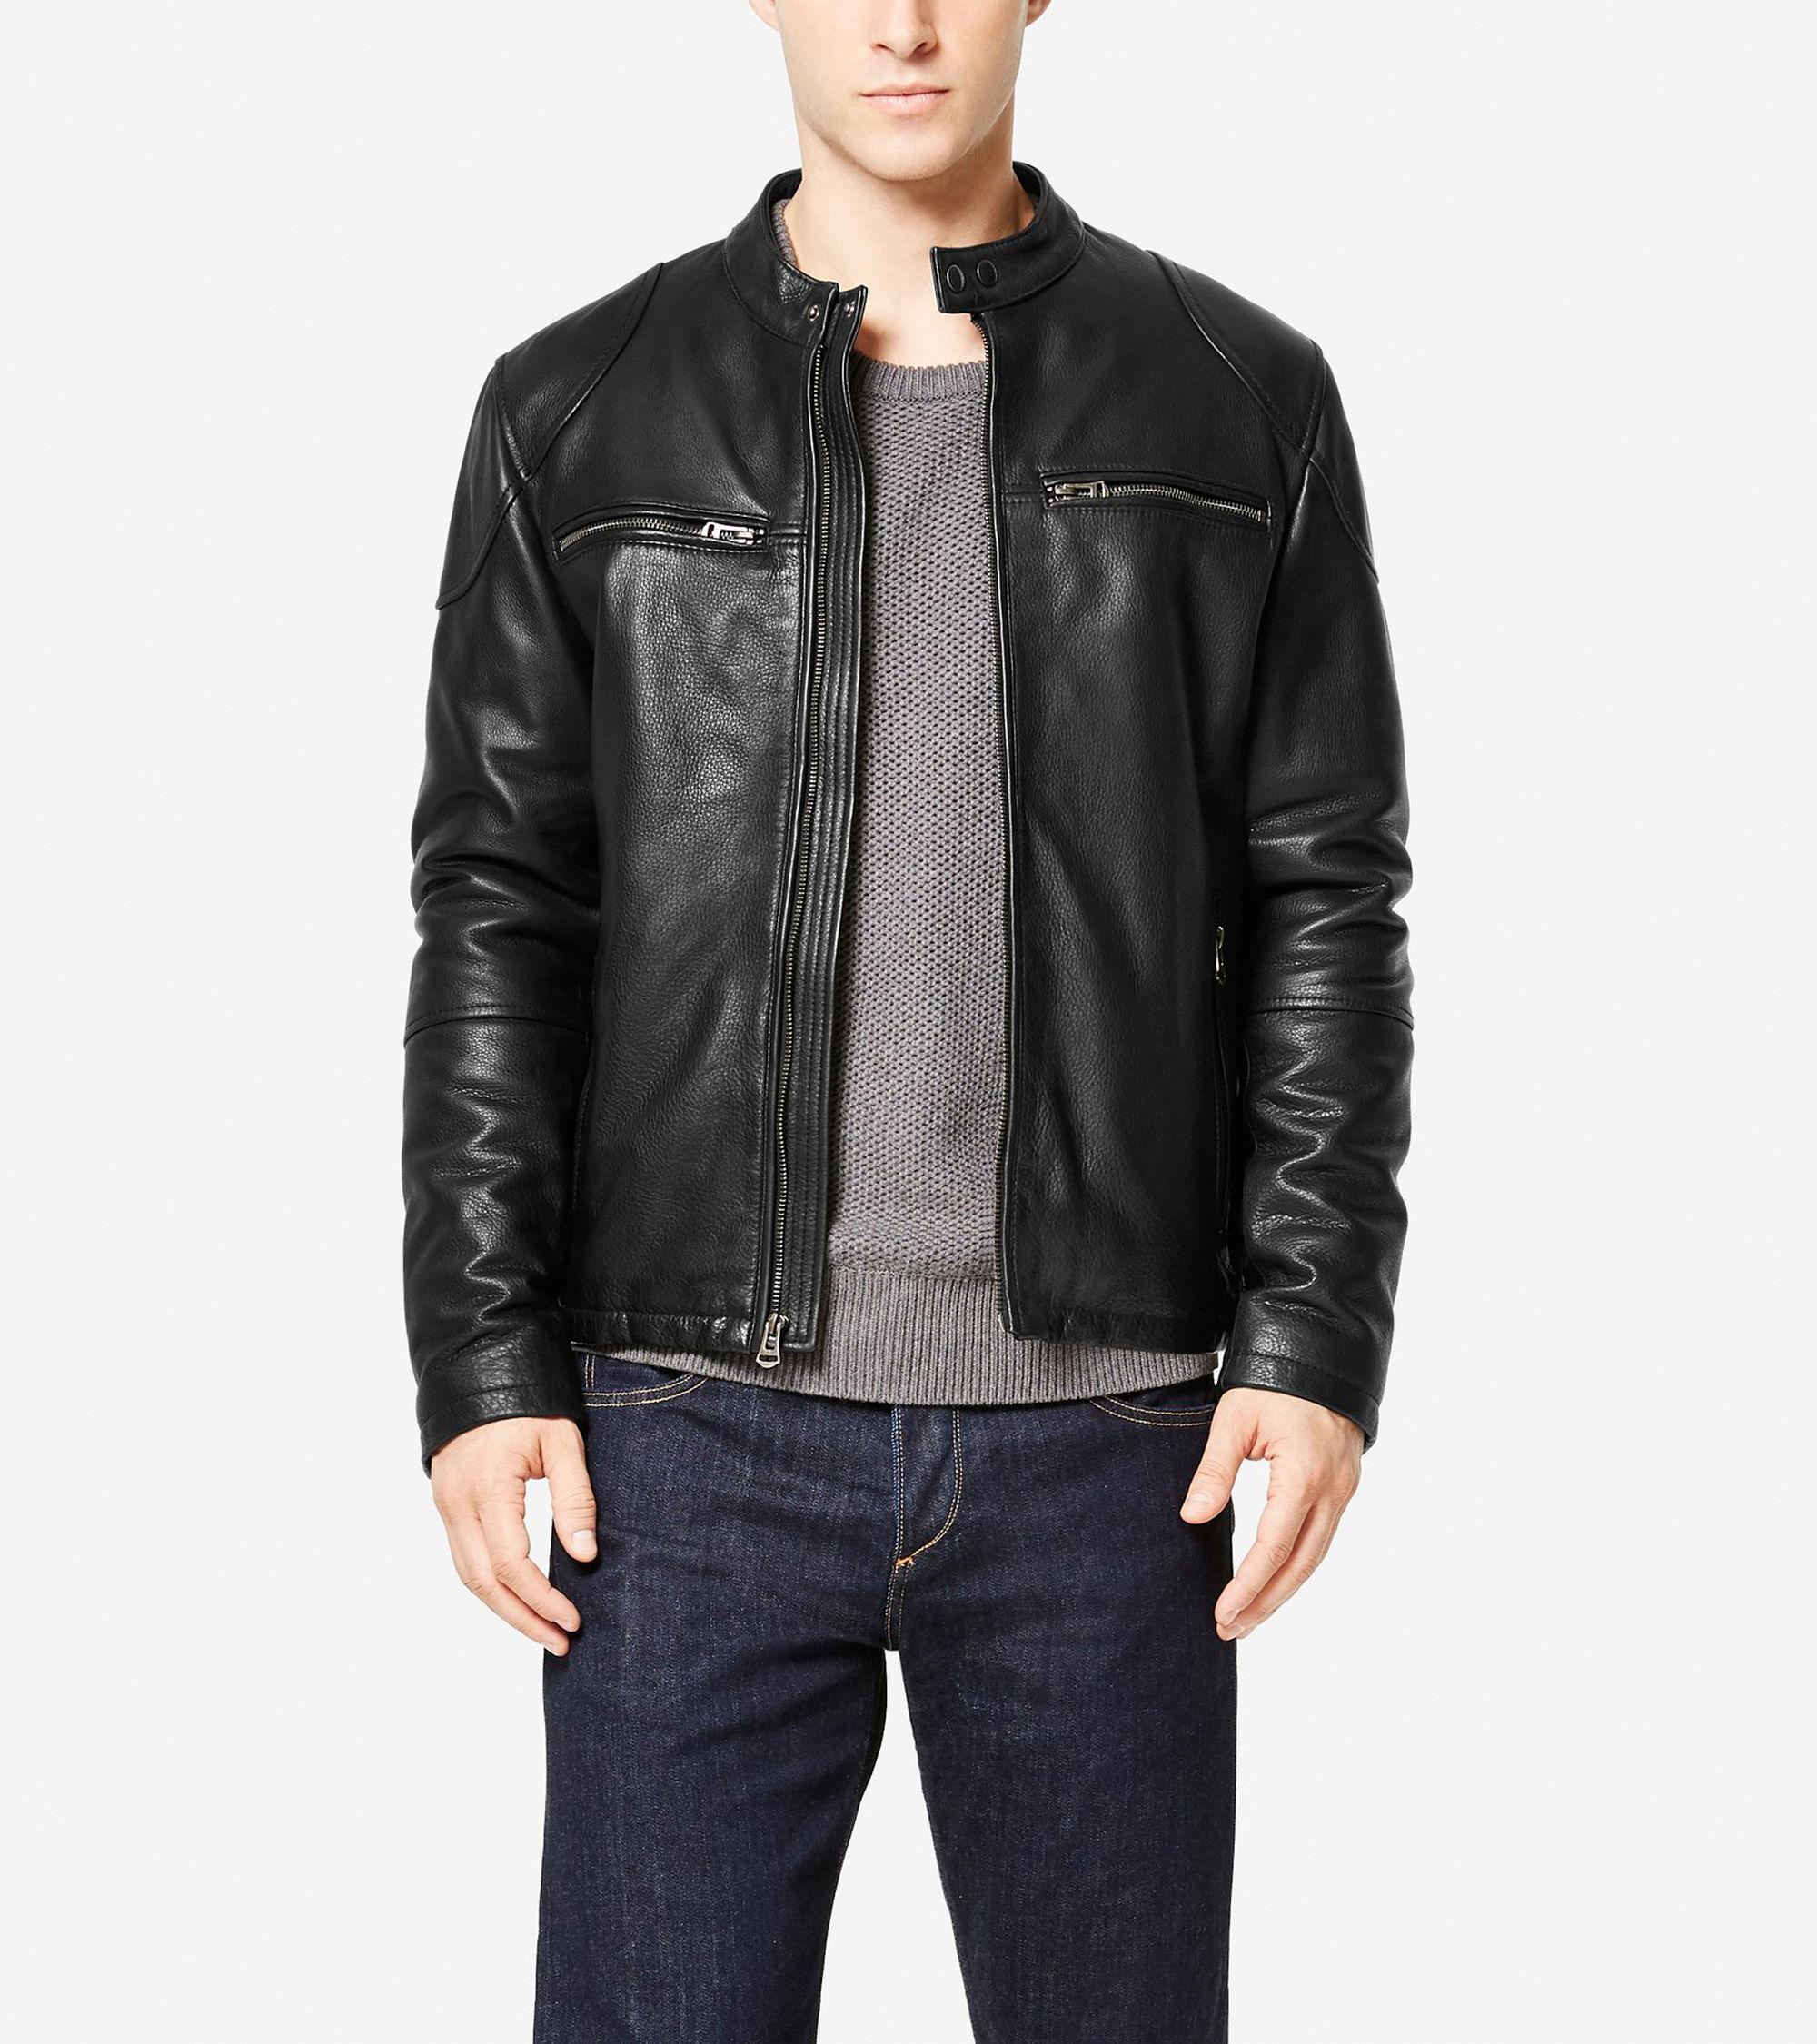 Lyst Cole Haan Spanish Grainy Leather Moto Jacket in